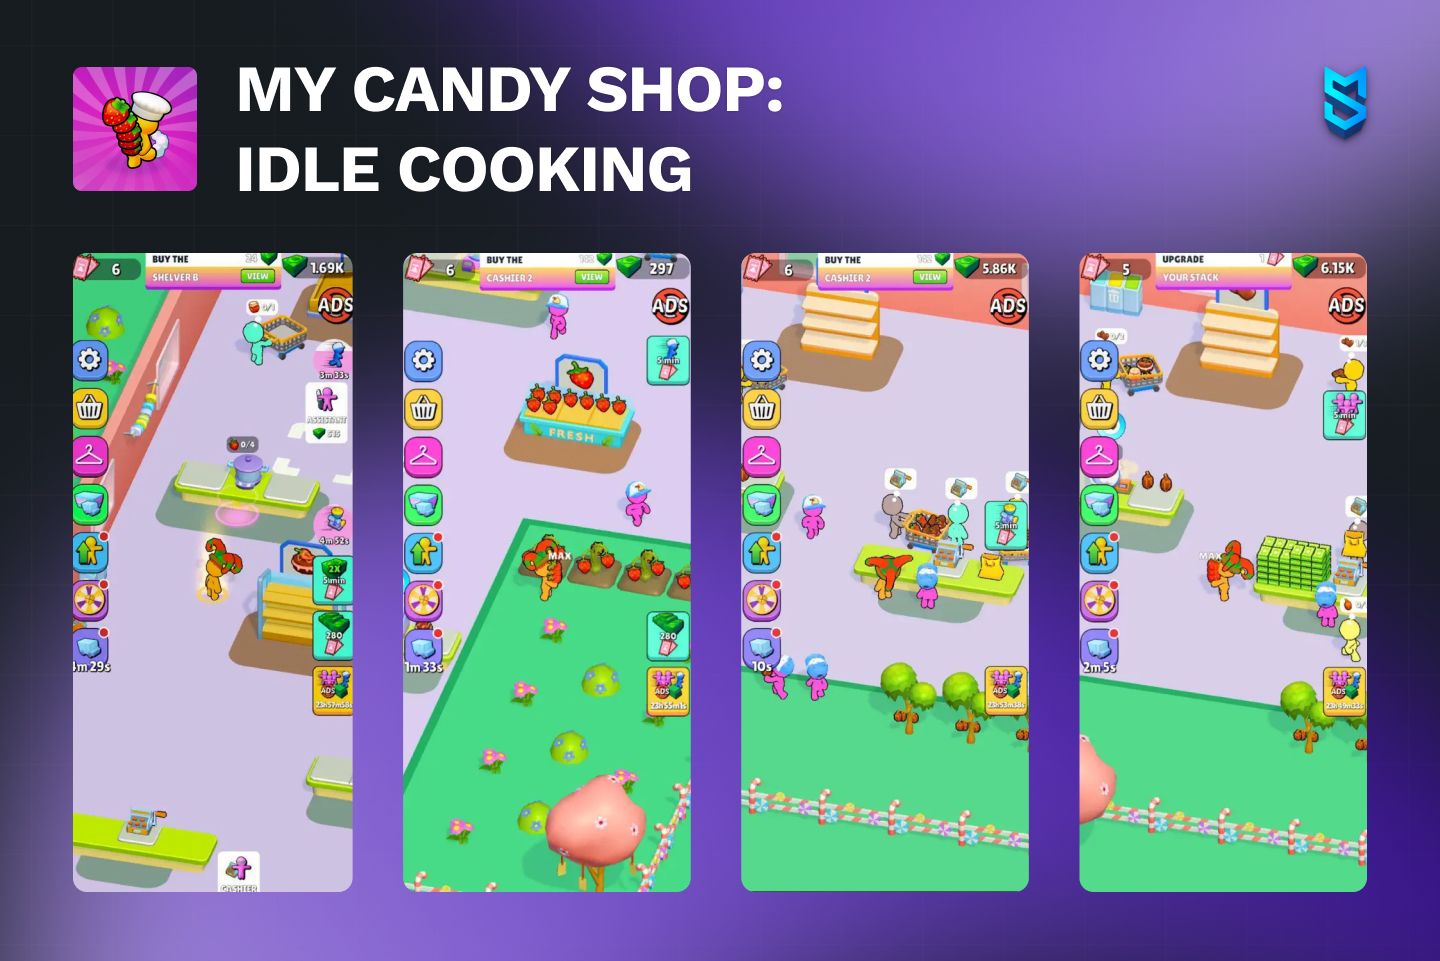 My Candy Shop: Idle Cooking